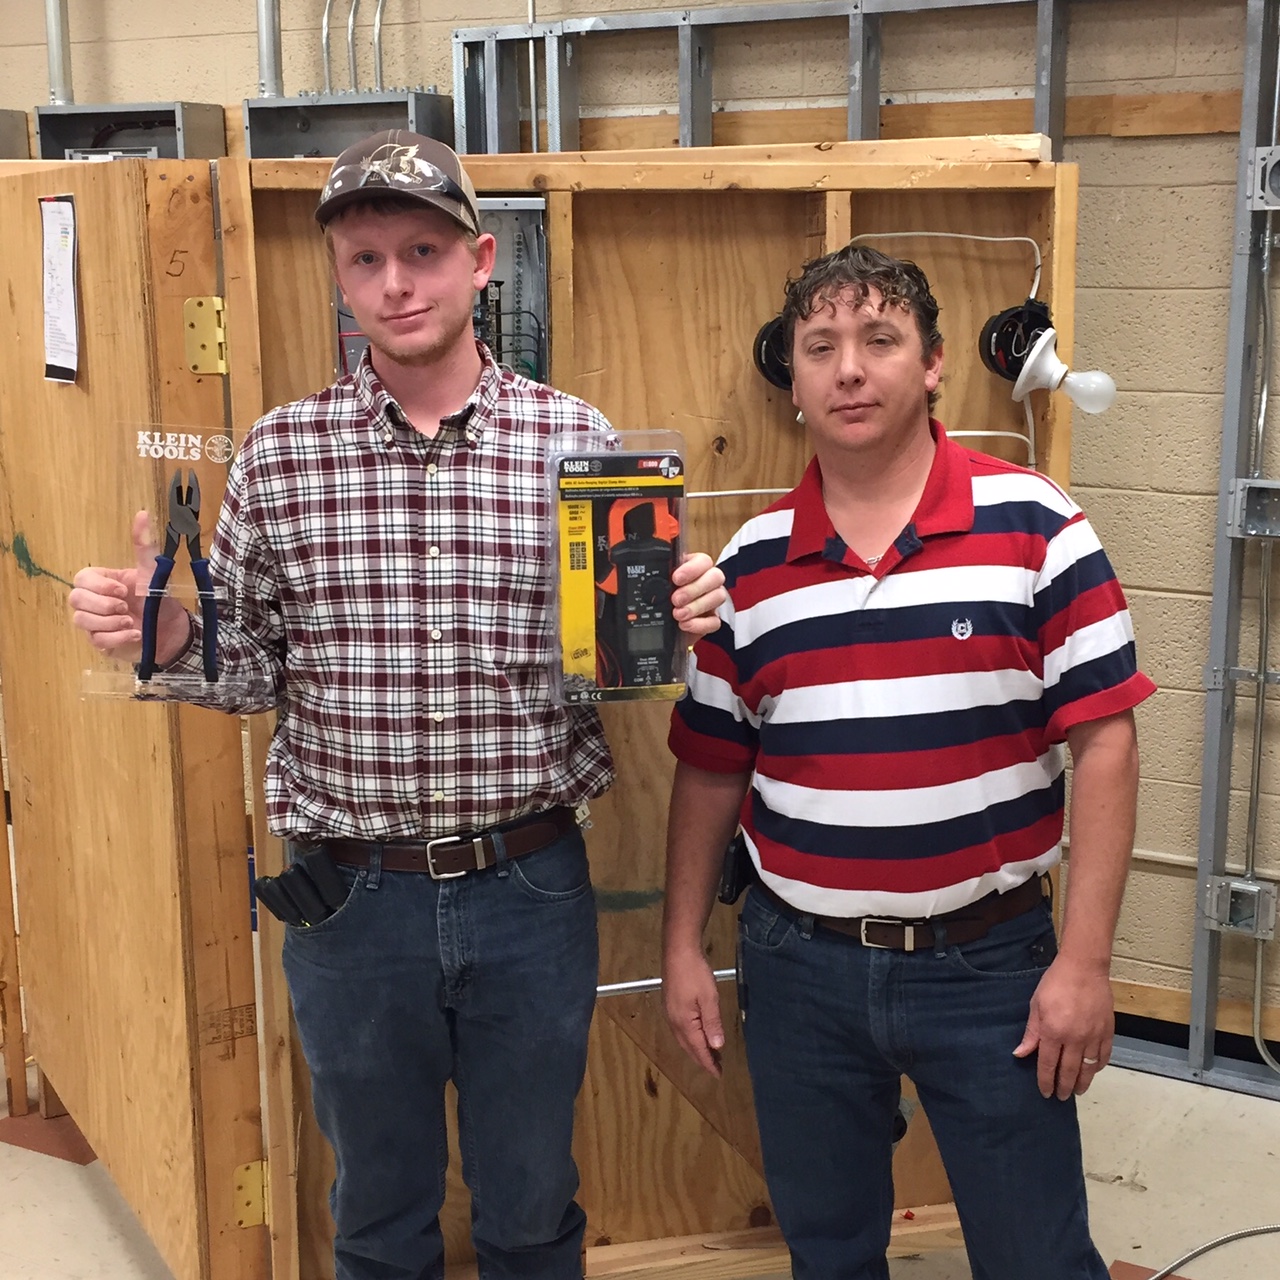 Electrical Systems Student Honored